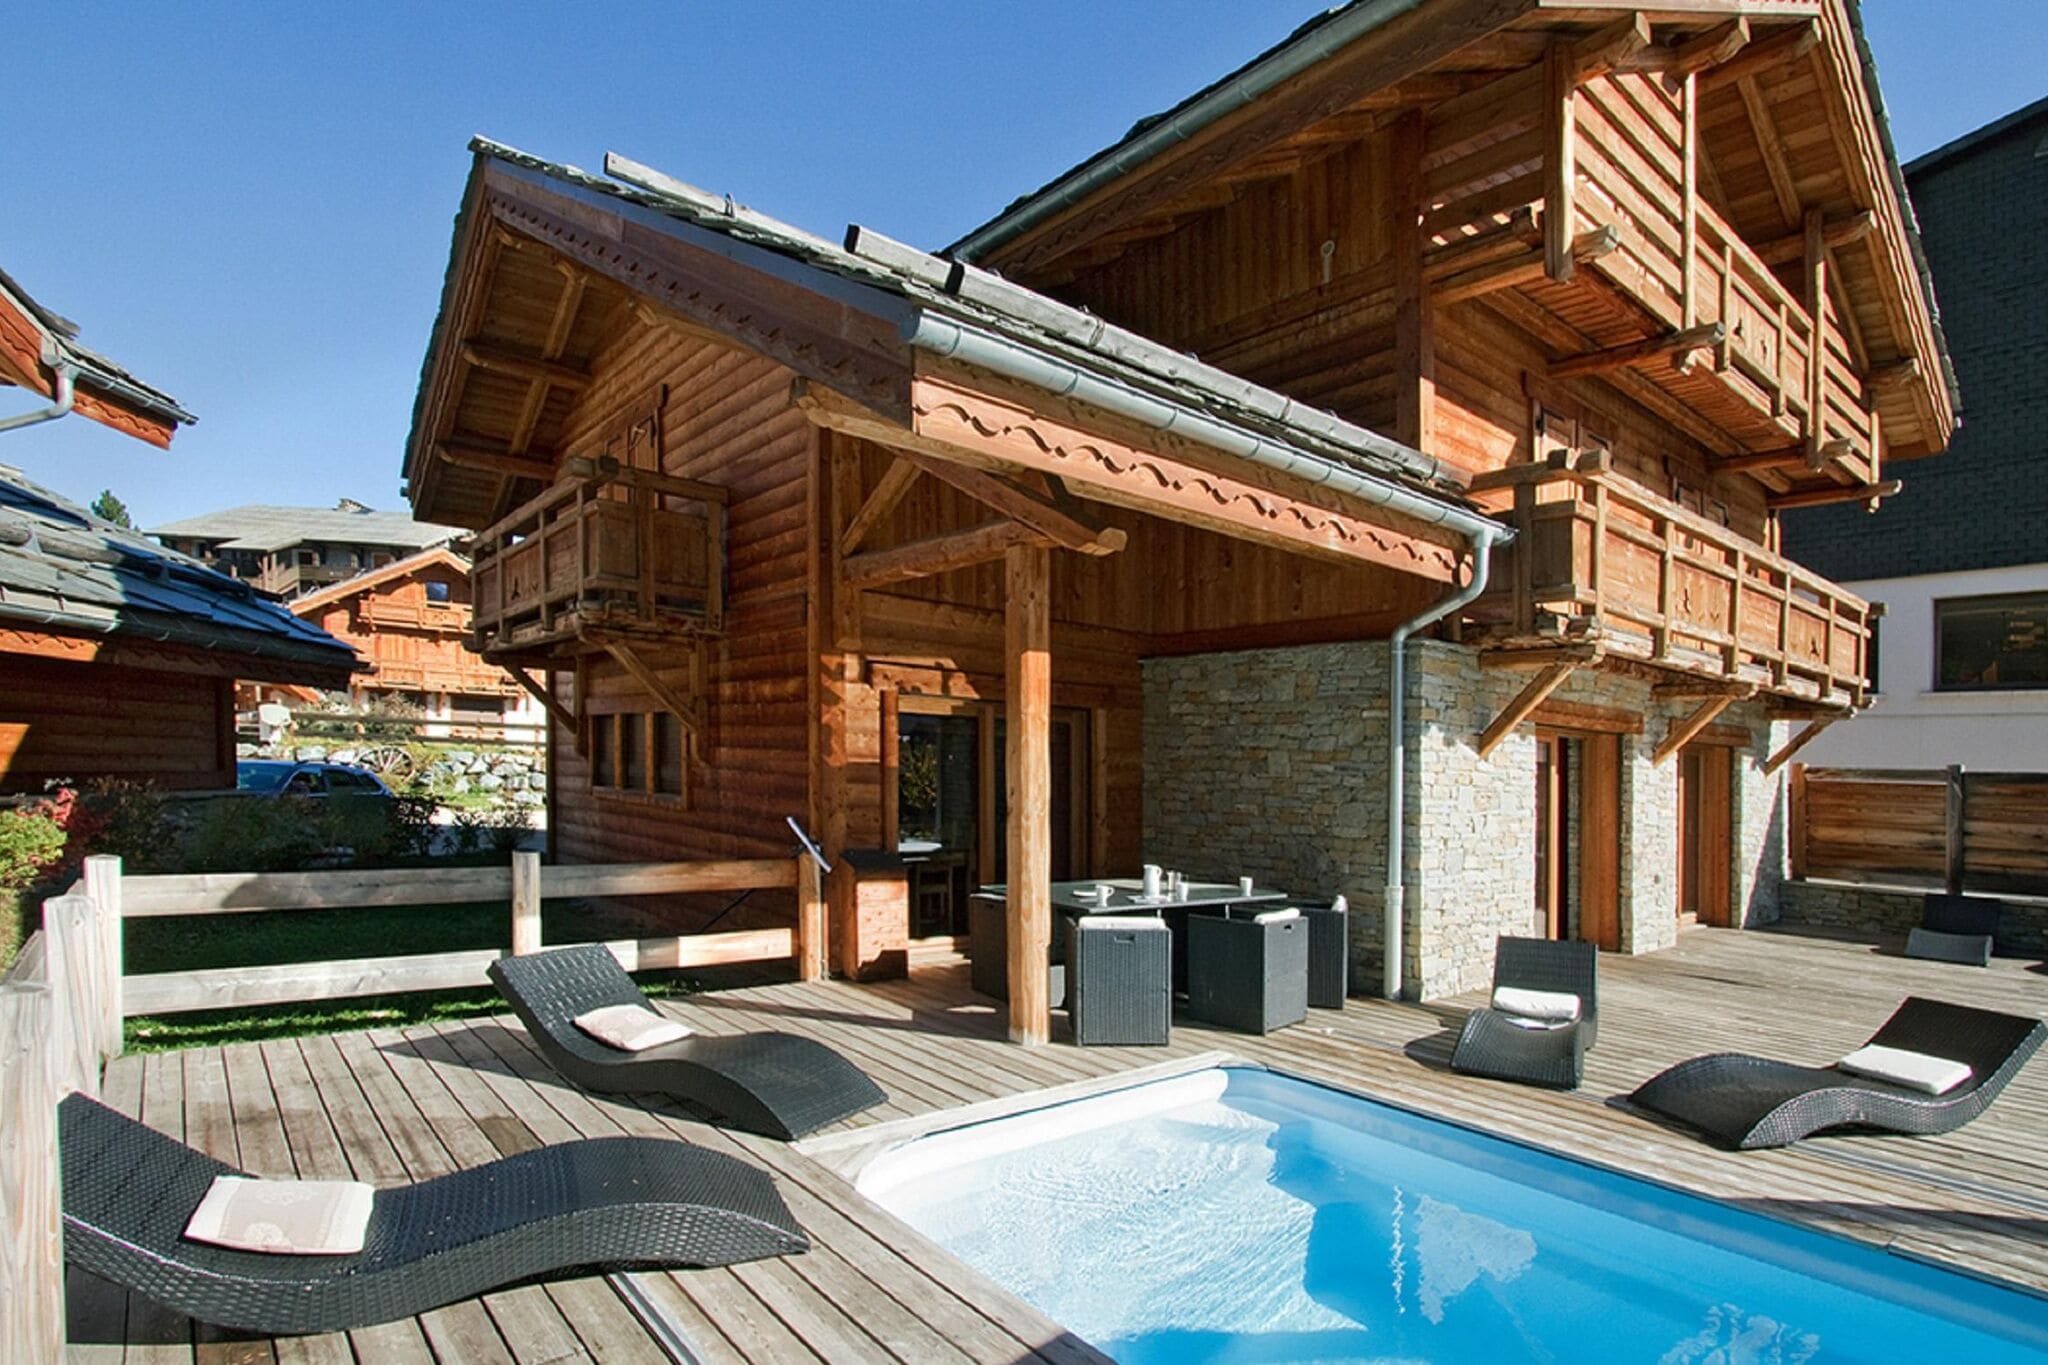 Delightful 14-person chalet with sauna and pool in Les Deux Alpes